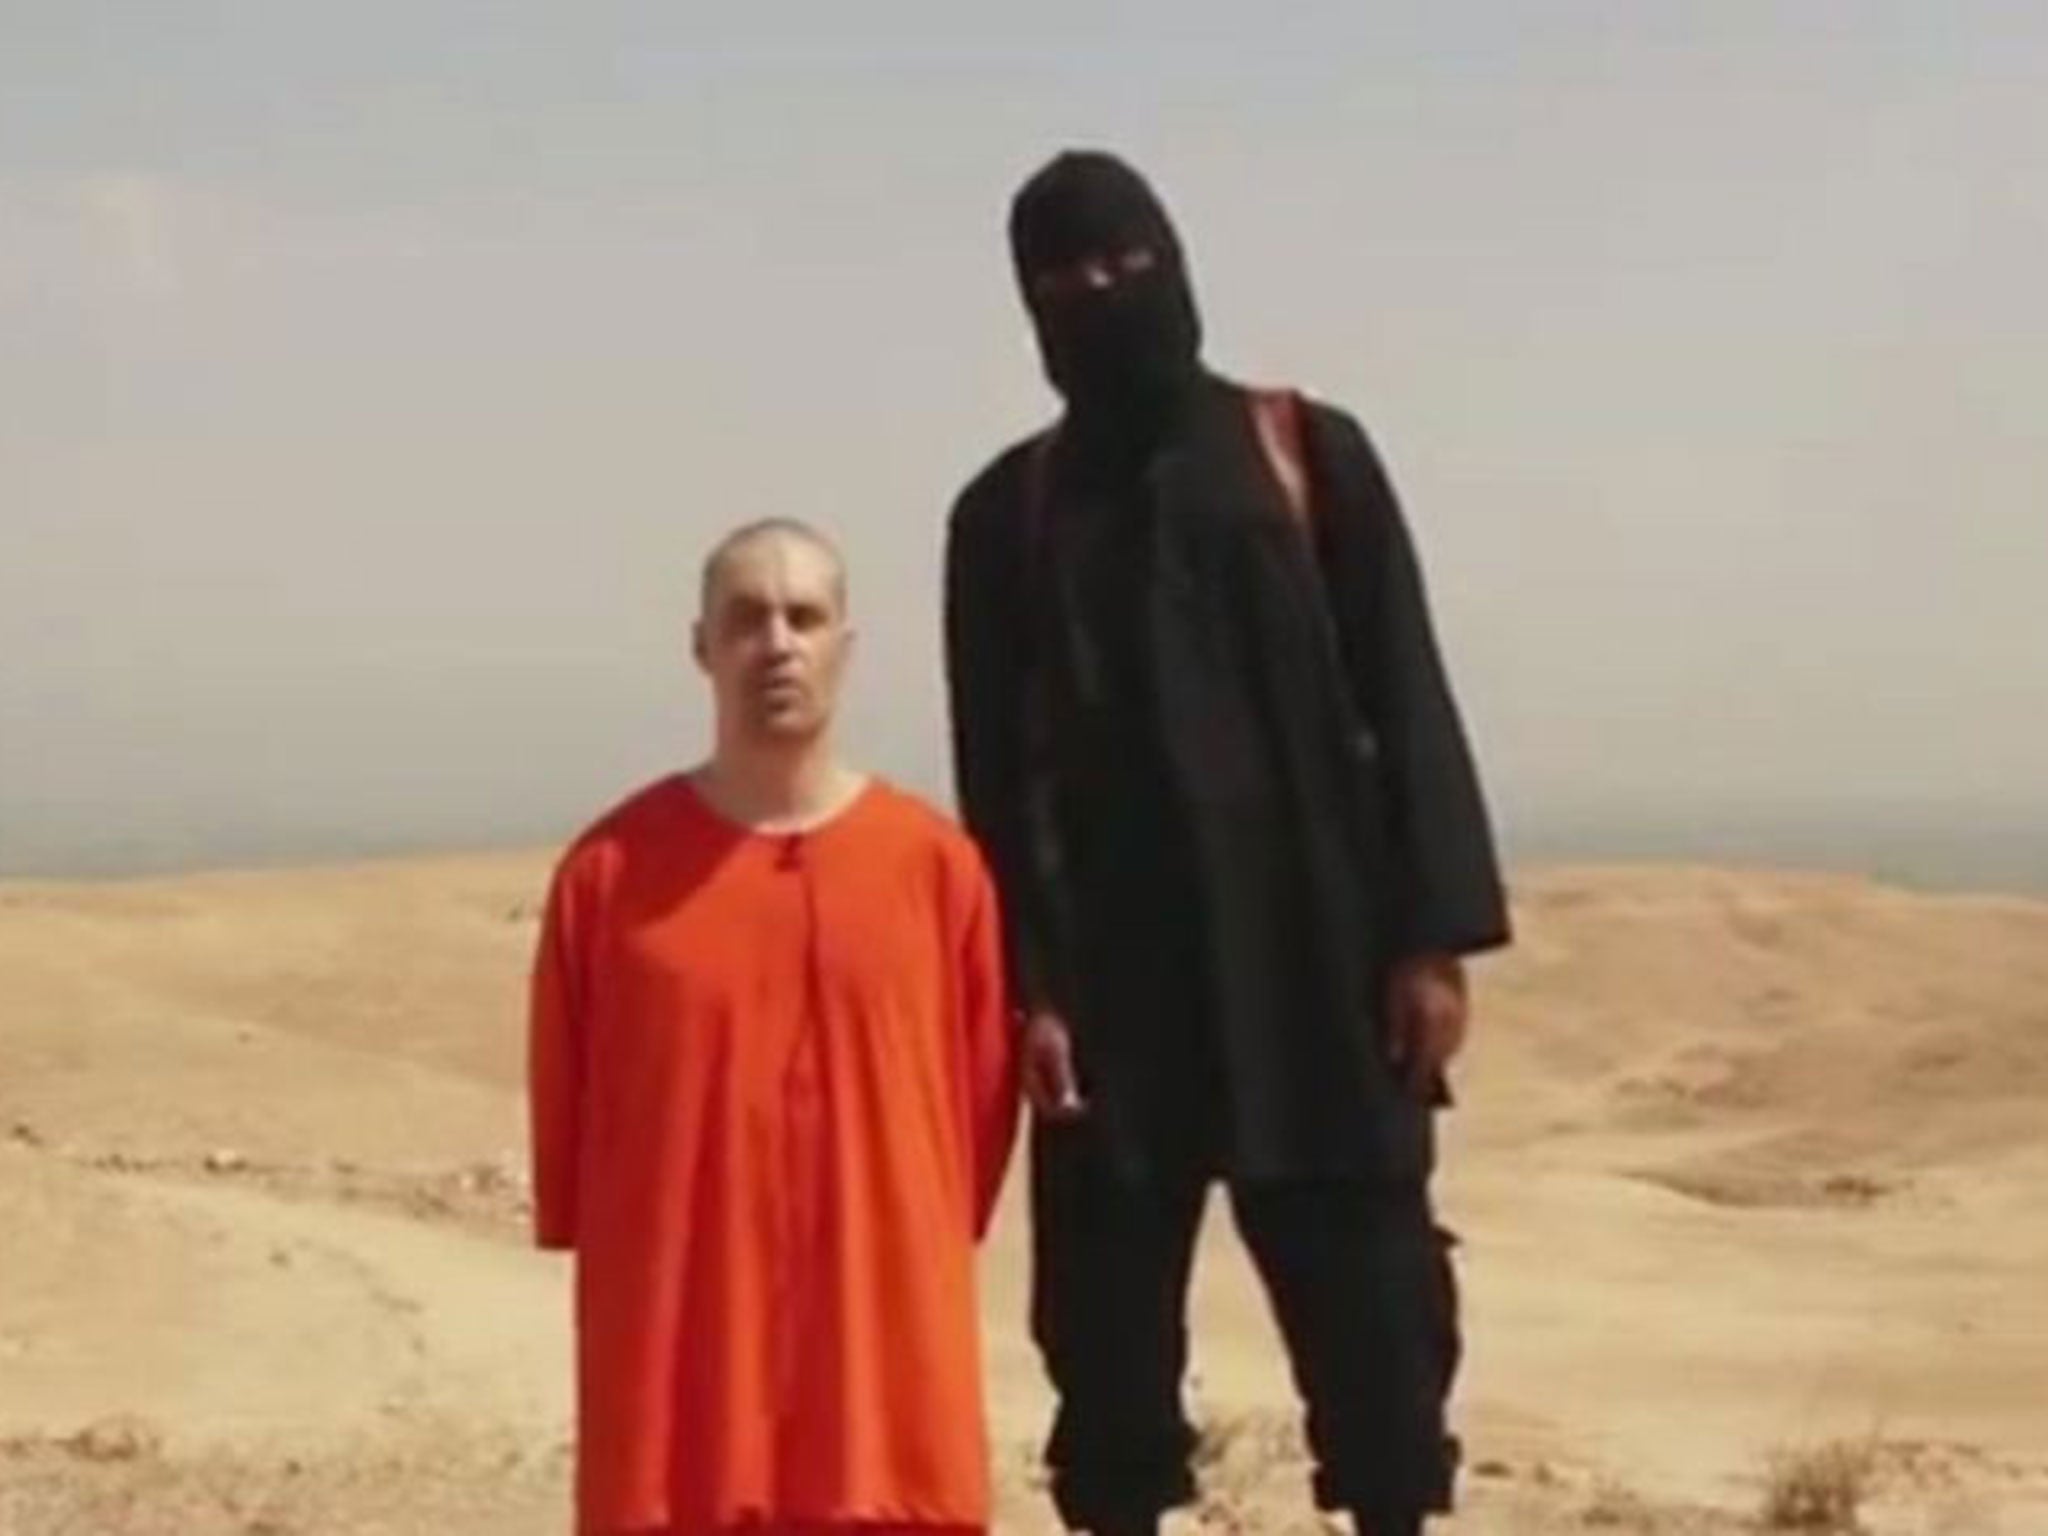 The video shows a man, thought to be James Foley, kneeling in front of a black-clad militant